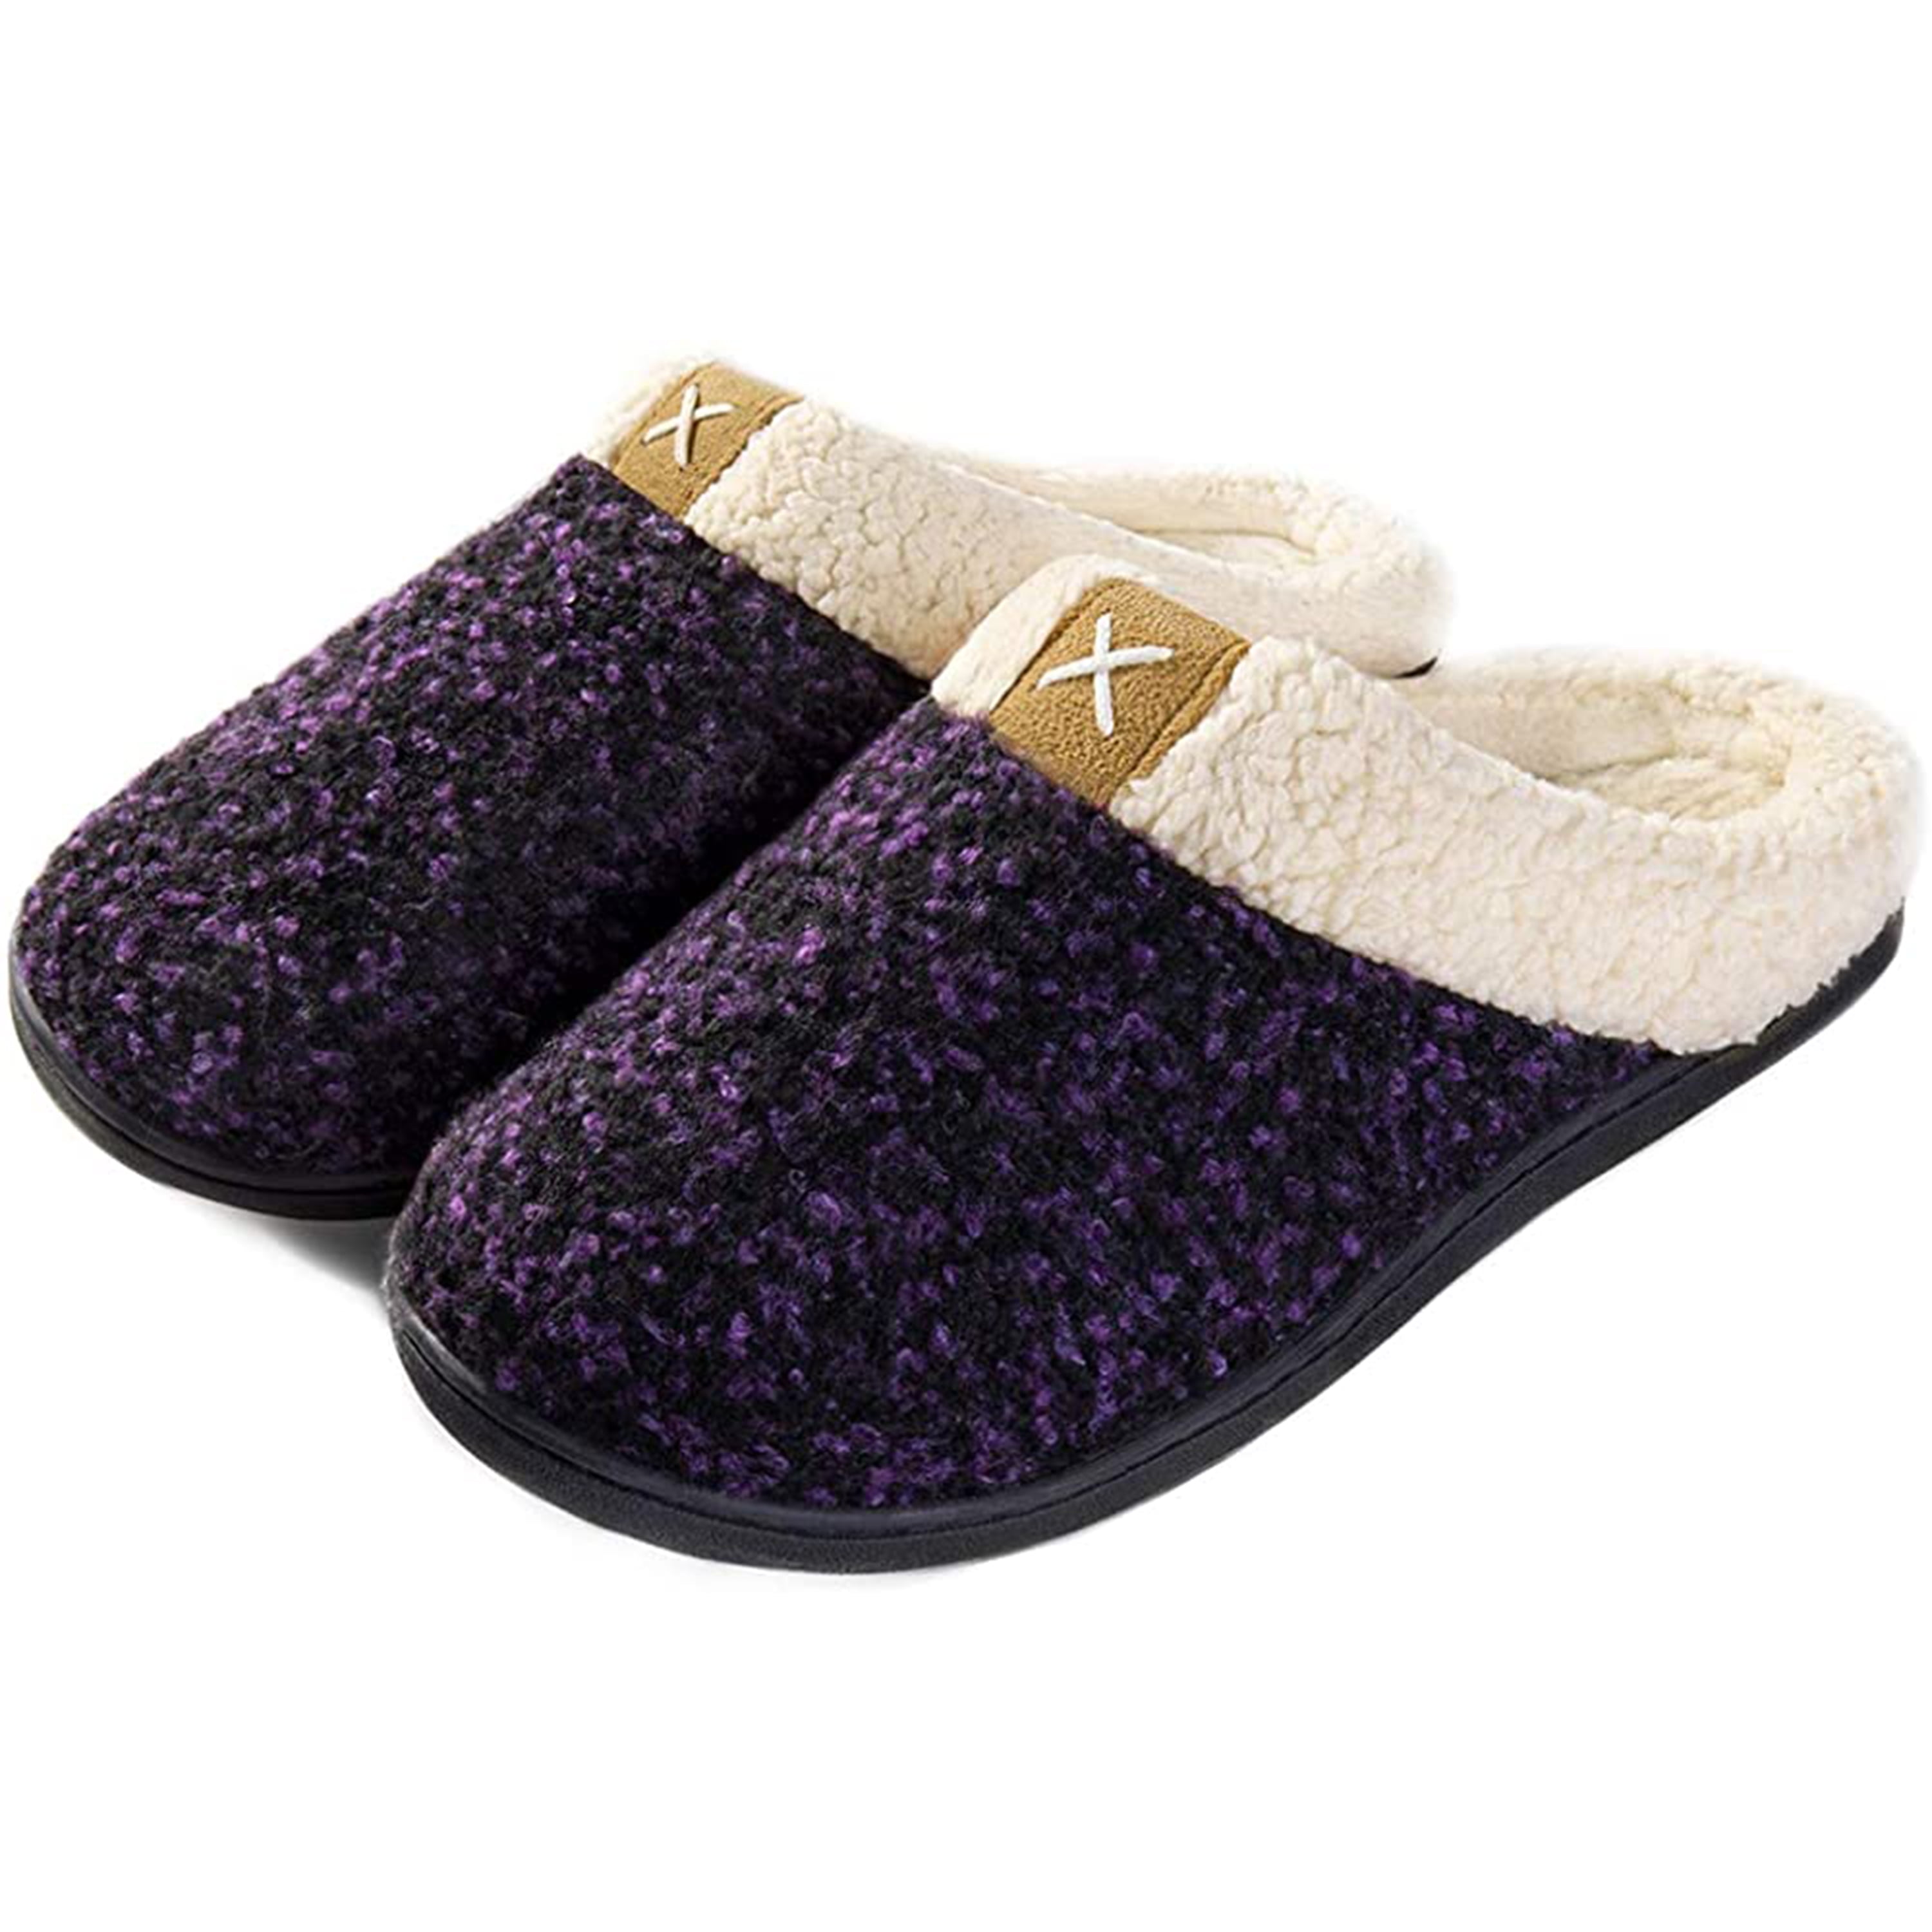 Outdoor Sole ULTRAIDEAS Womens & Mens Comfort Polar Fleece Slip on Slippers Color Block Memory Foam House Loafers Shoes w/Indoor 